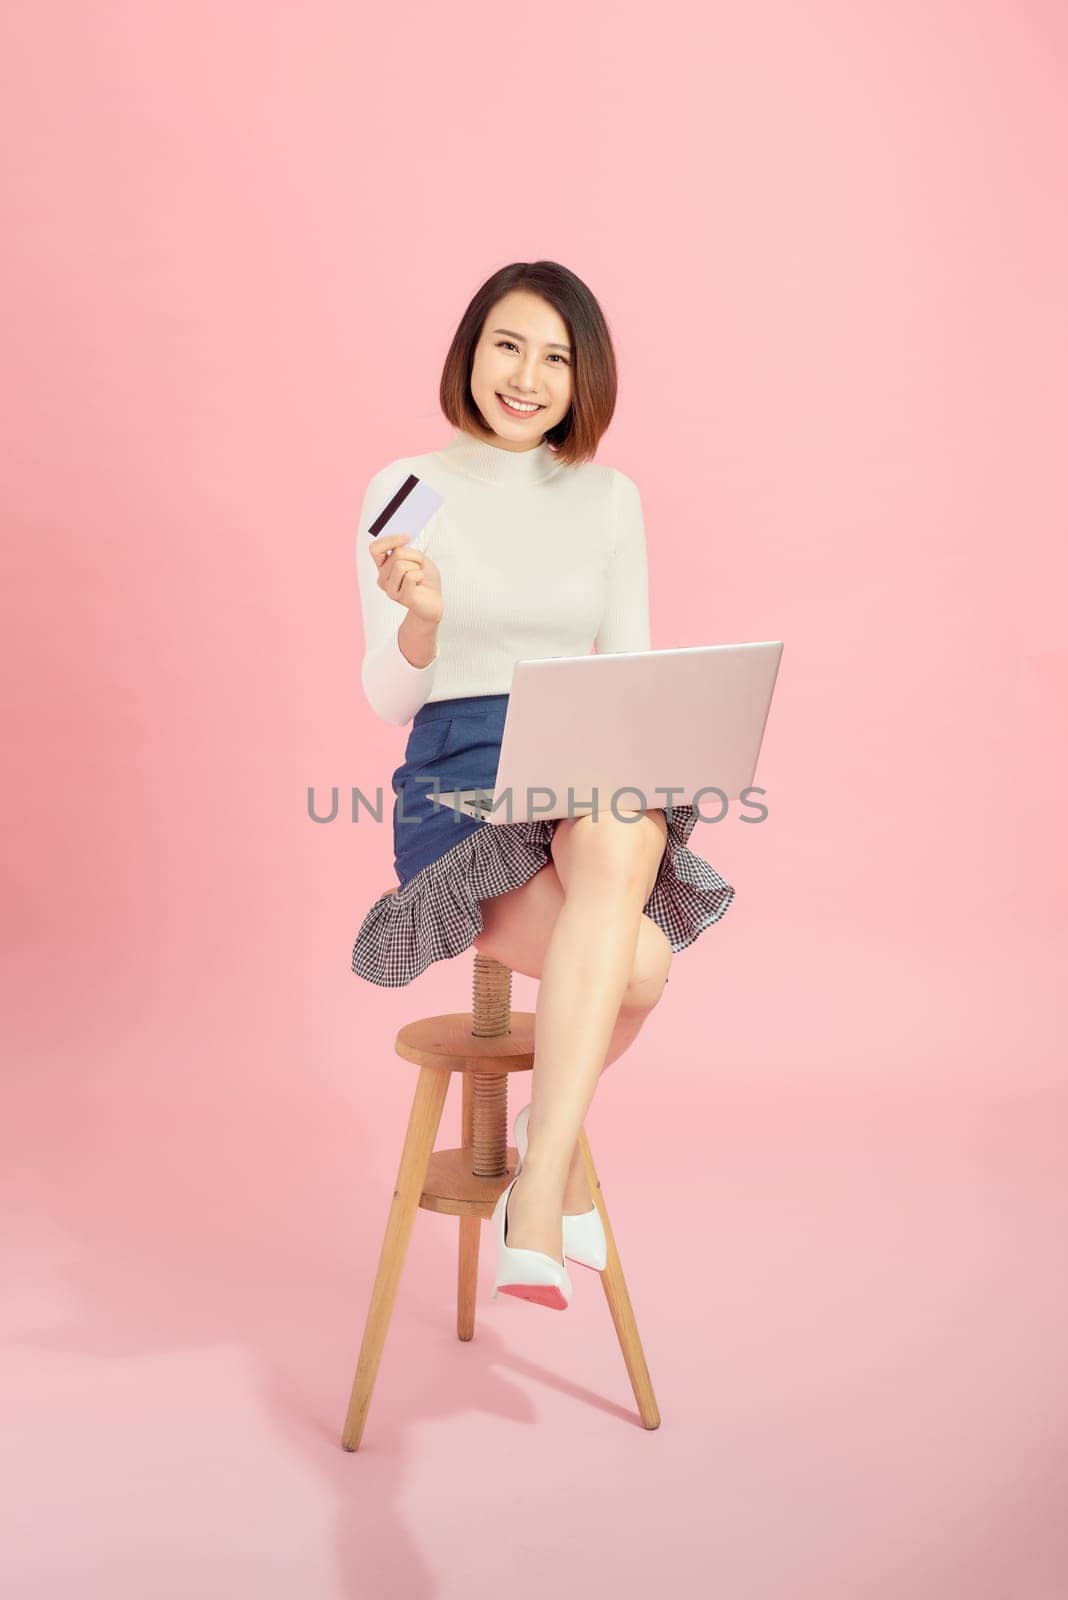 Young Asian woman using credit card to payment online with her laptop. Isolated on pink background.